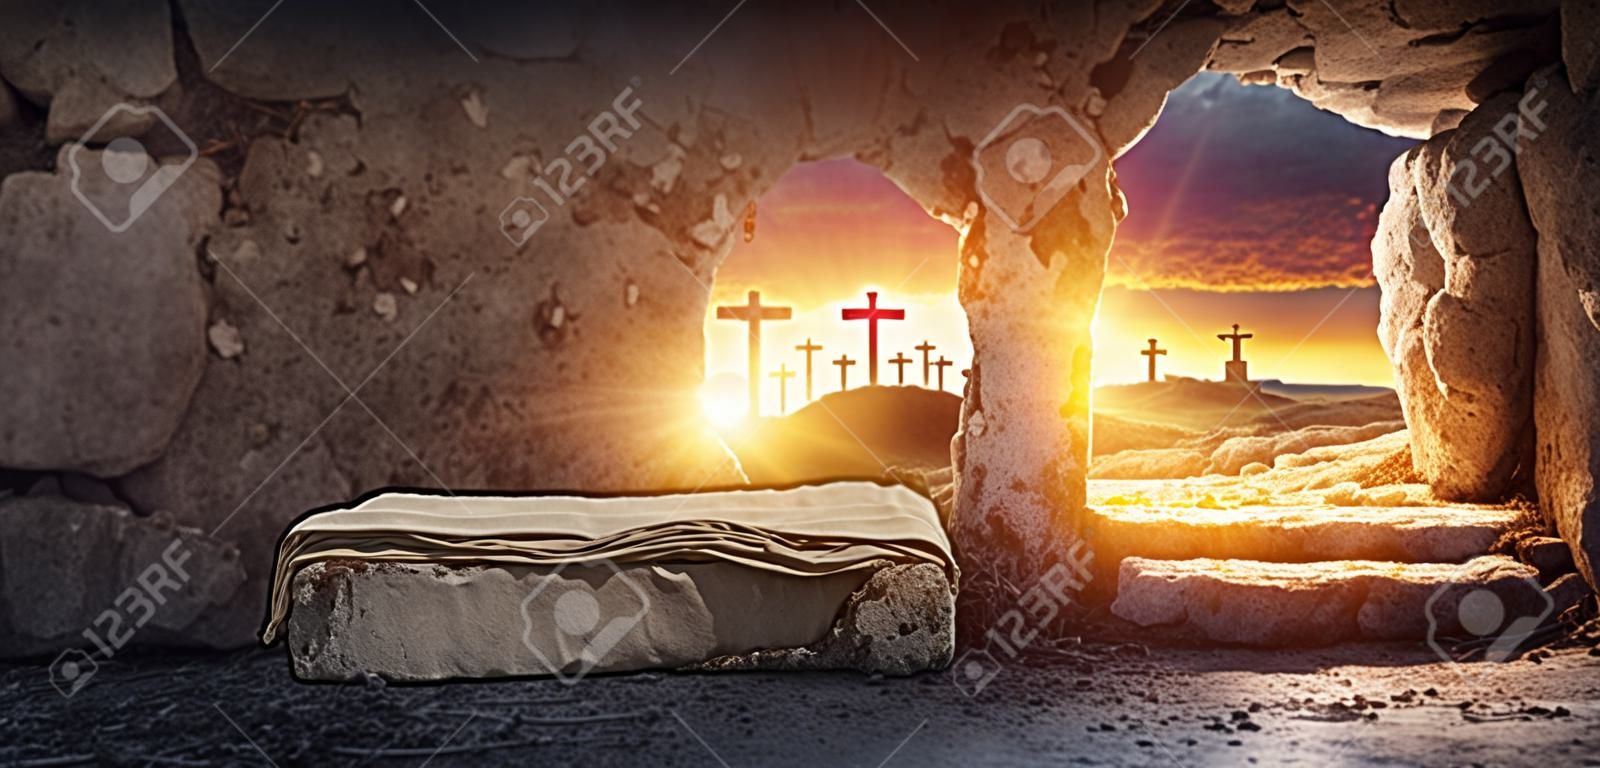 Tomb Empty With Shroud And Crucifixion At Sunrise Resurrection Of Jesus Christ